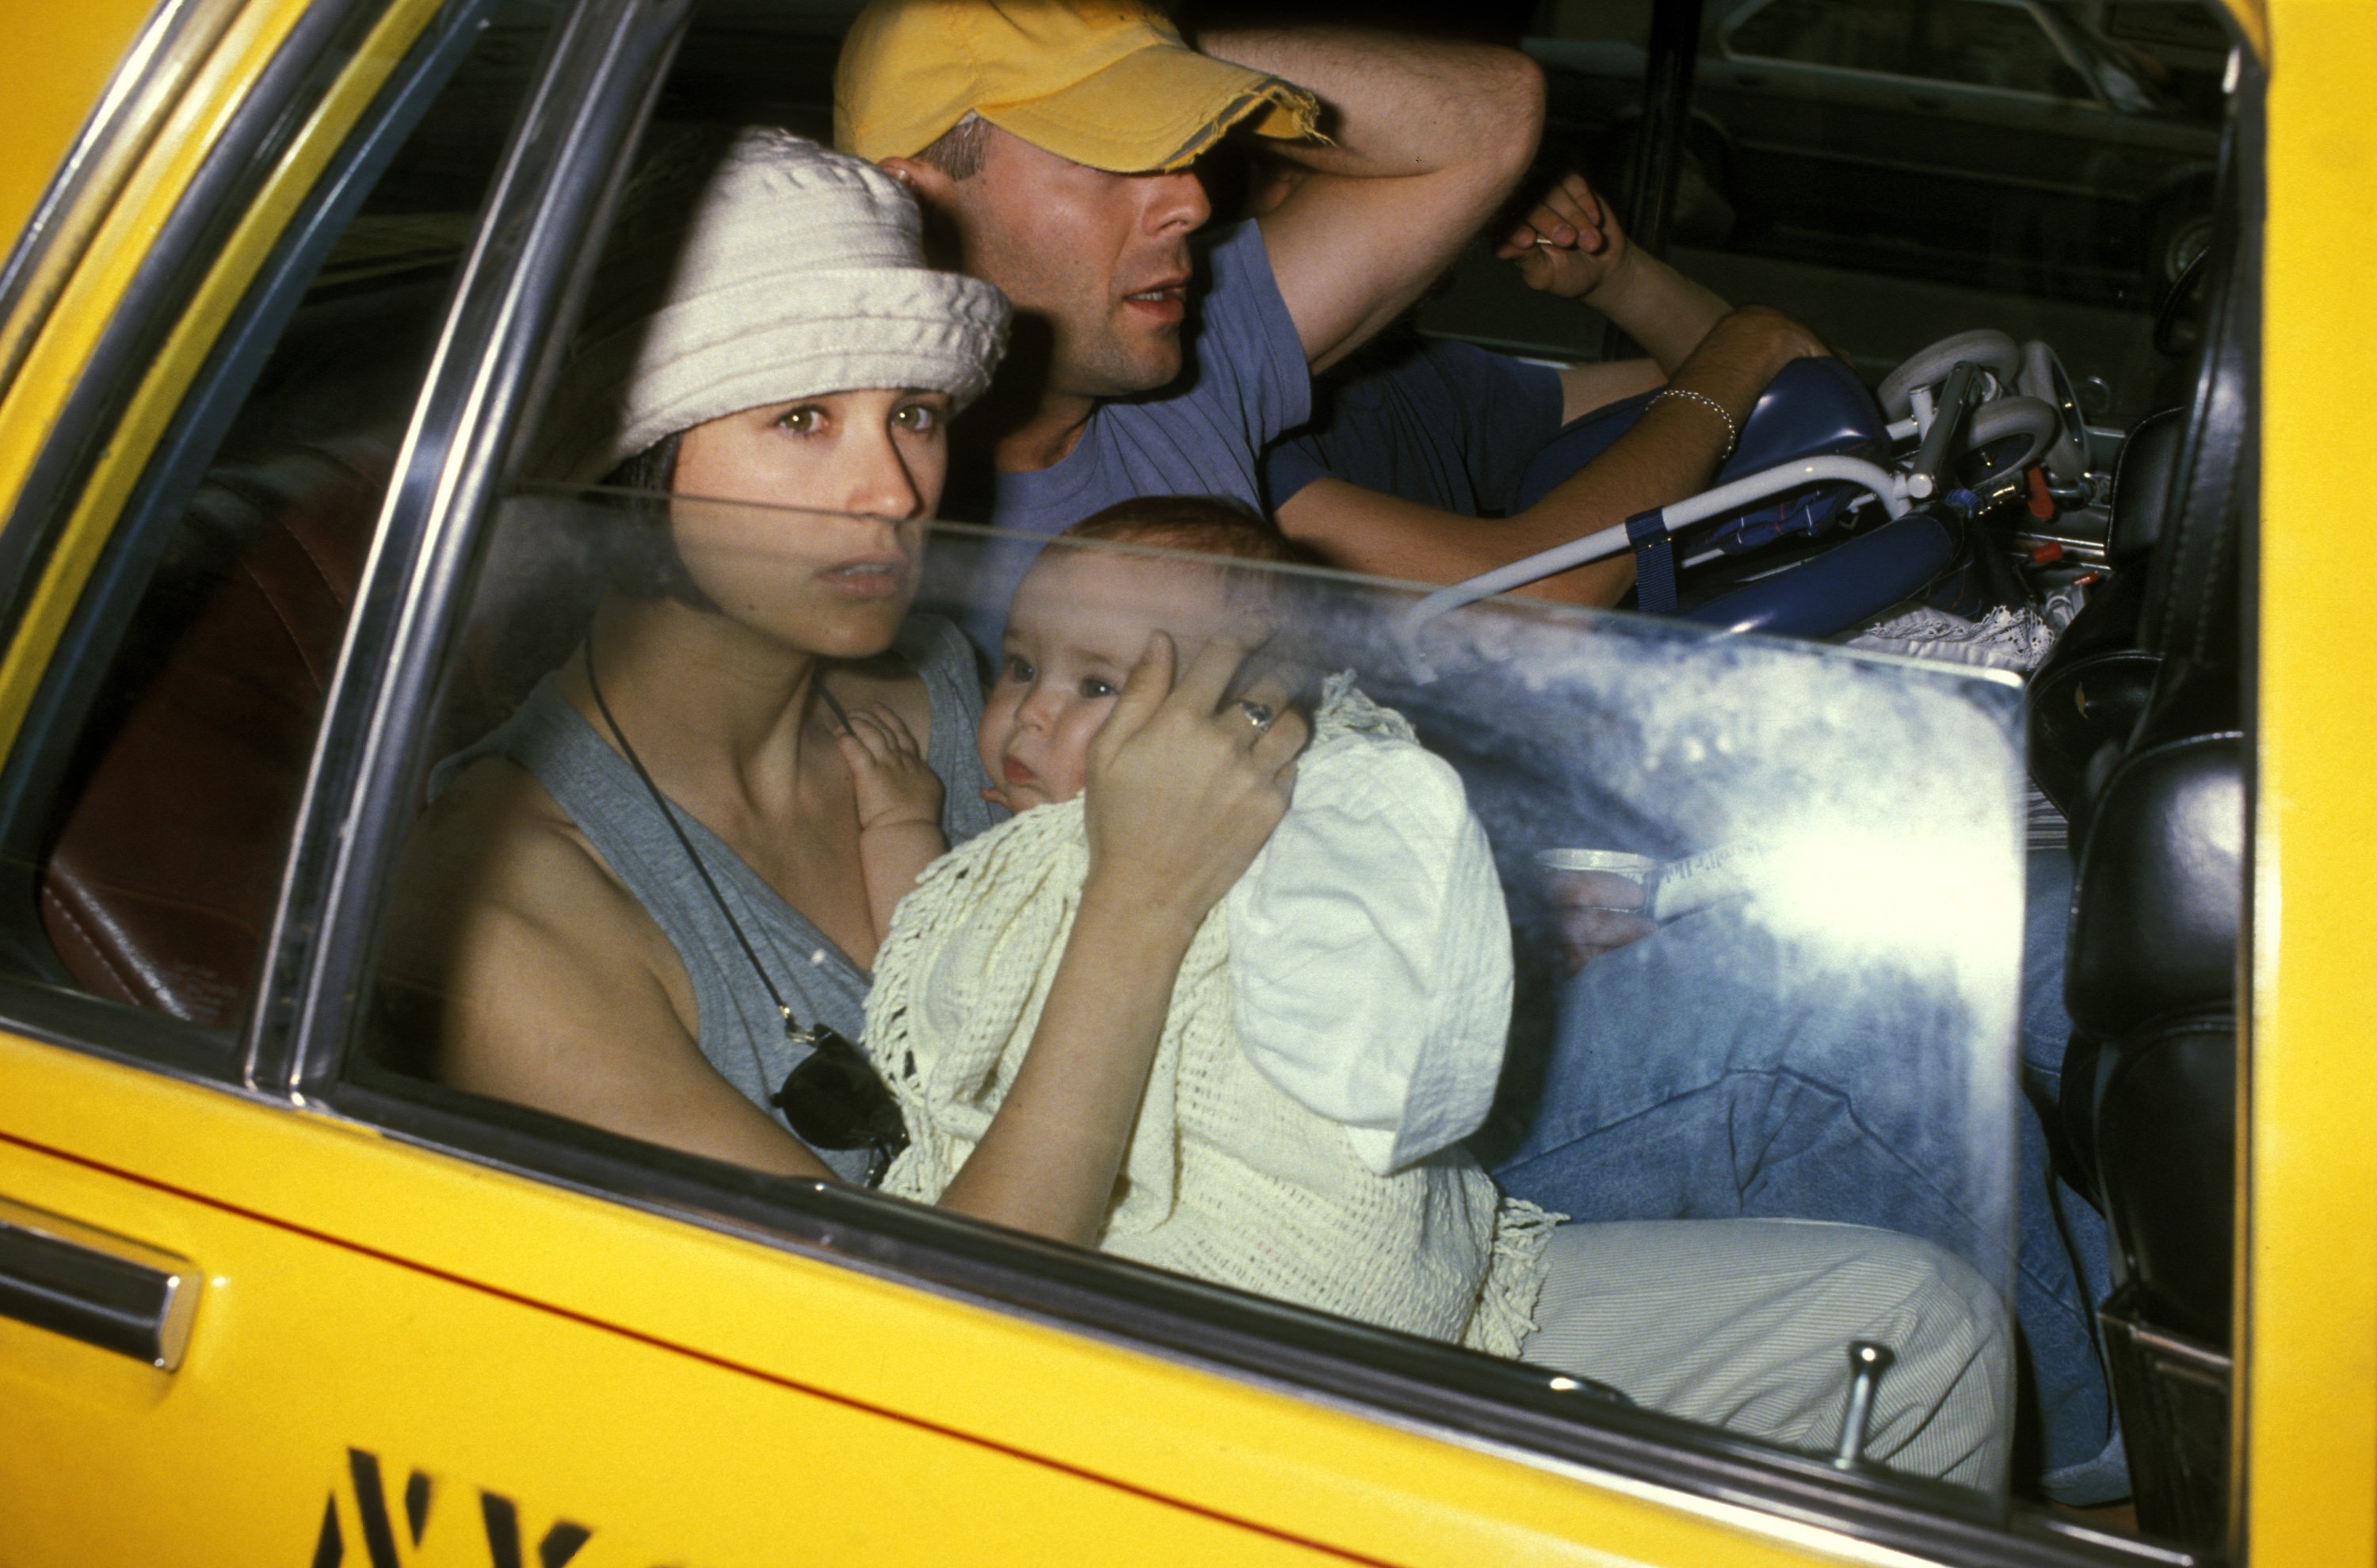 Bruce Willis and Demi Moore with Rumer Willis in New York City - May 20, 1989 | Source: Getty Images